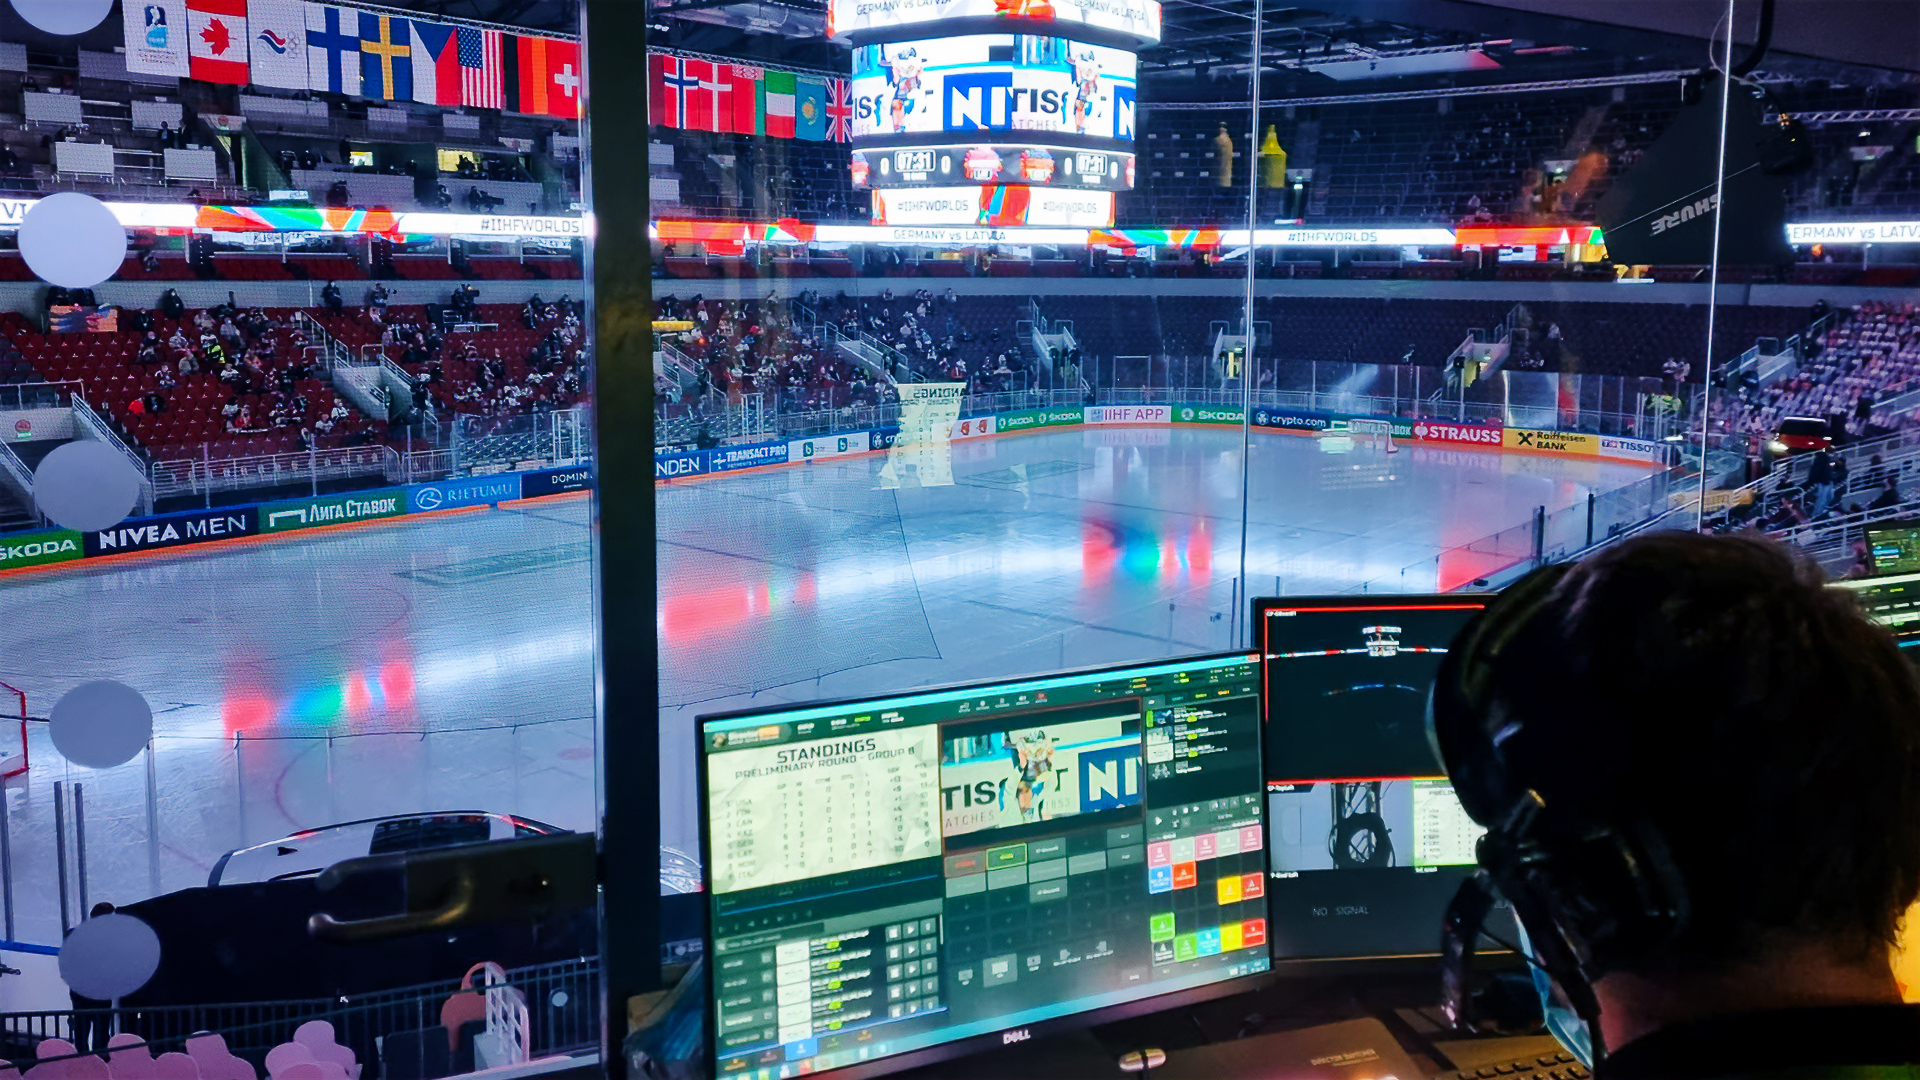 ColosseoEAS was providing on-site support during the 2021 IIHF World Championship